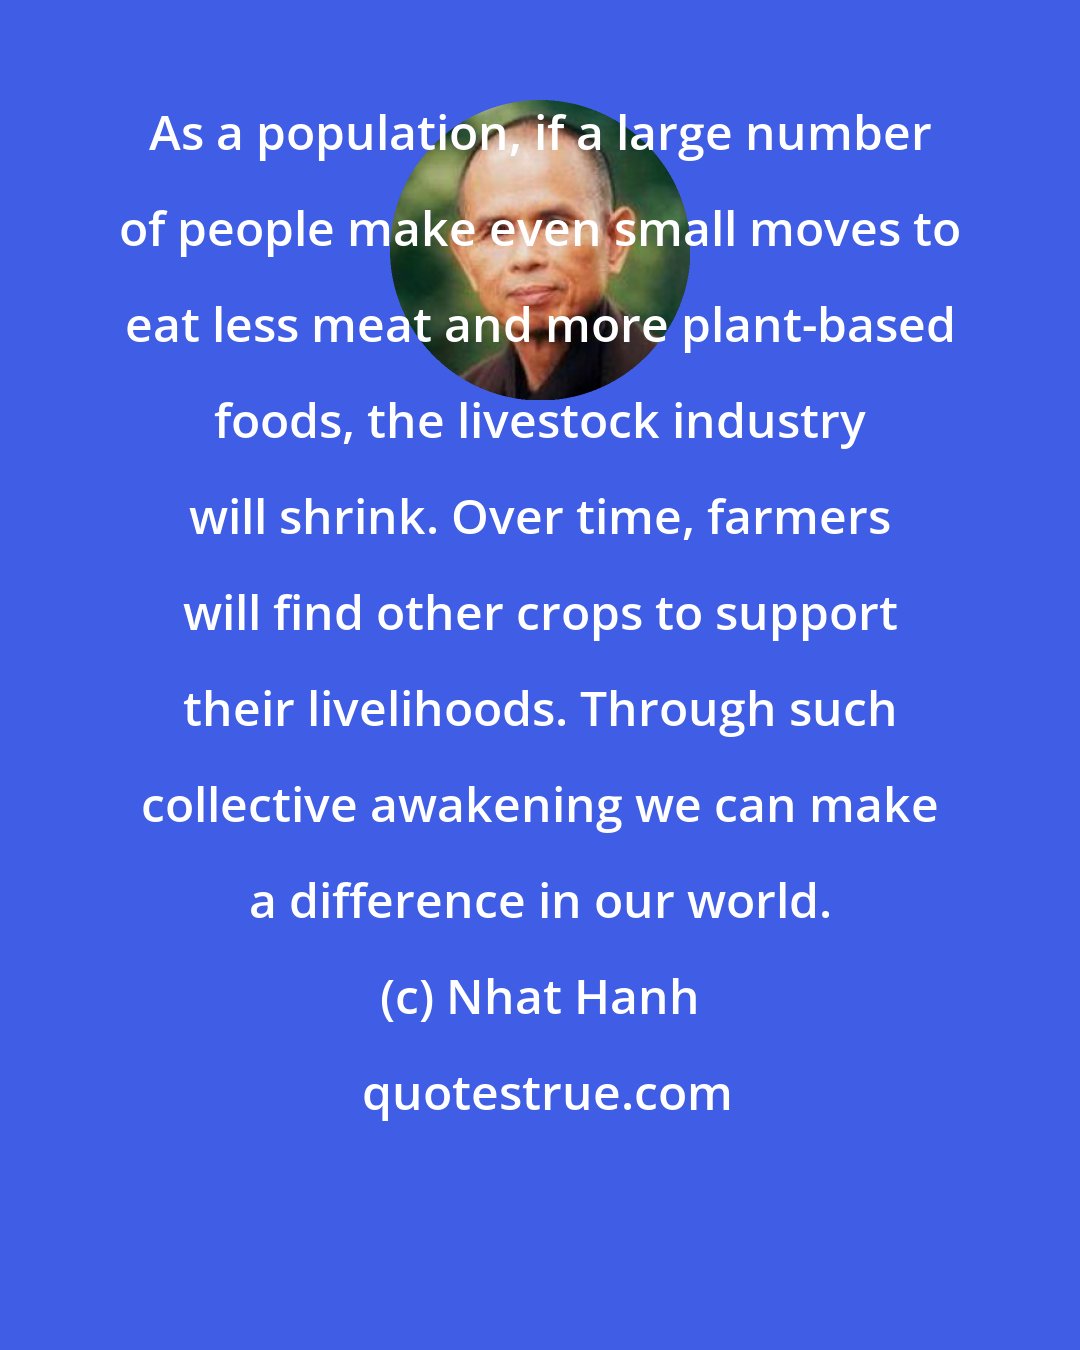 Nhat Hanh: As a population, if a large number of people make even small moves to eat less meat and more plant-based foods, the livestock industry will shrink. Over time, farmers will find other crops to support their livelihoods. Through such collective awakening we can make a difference in our world.